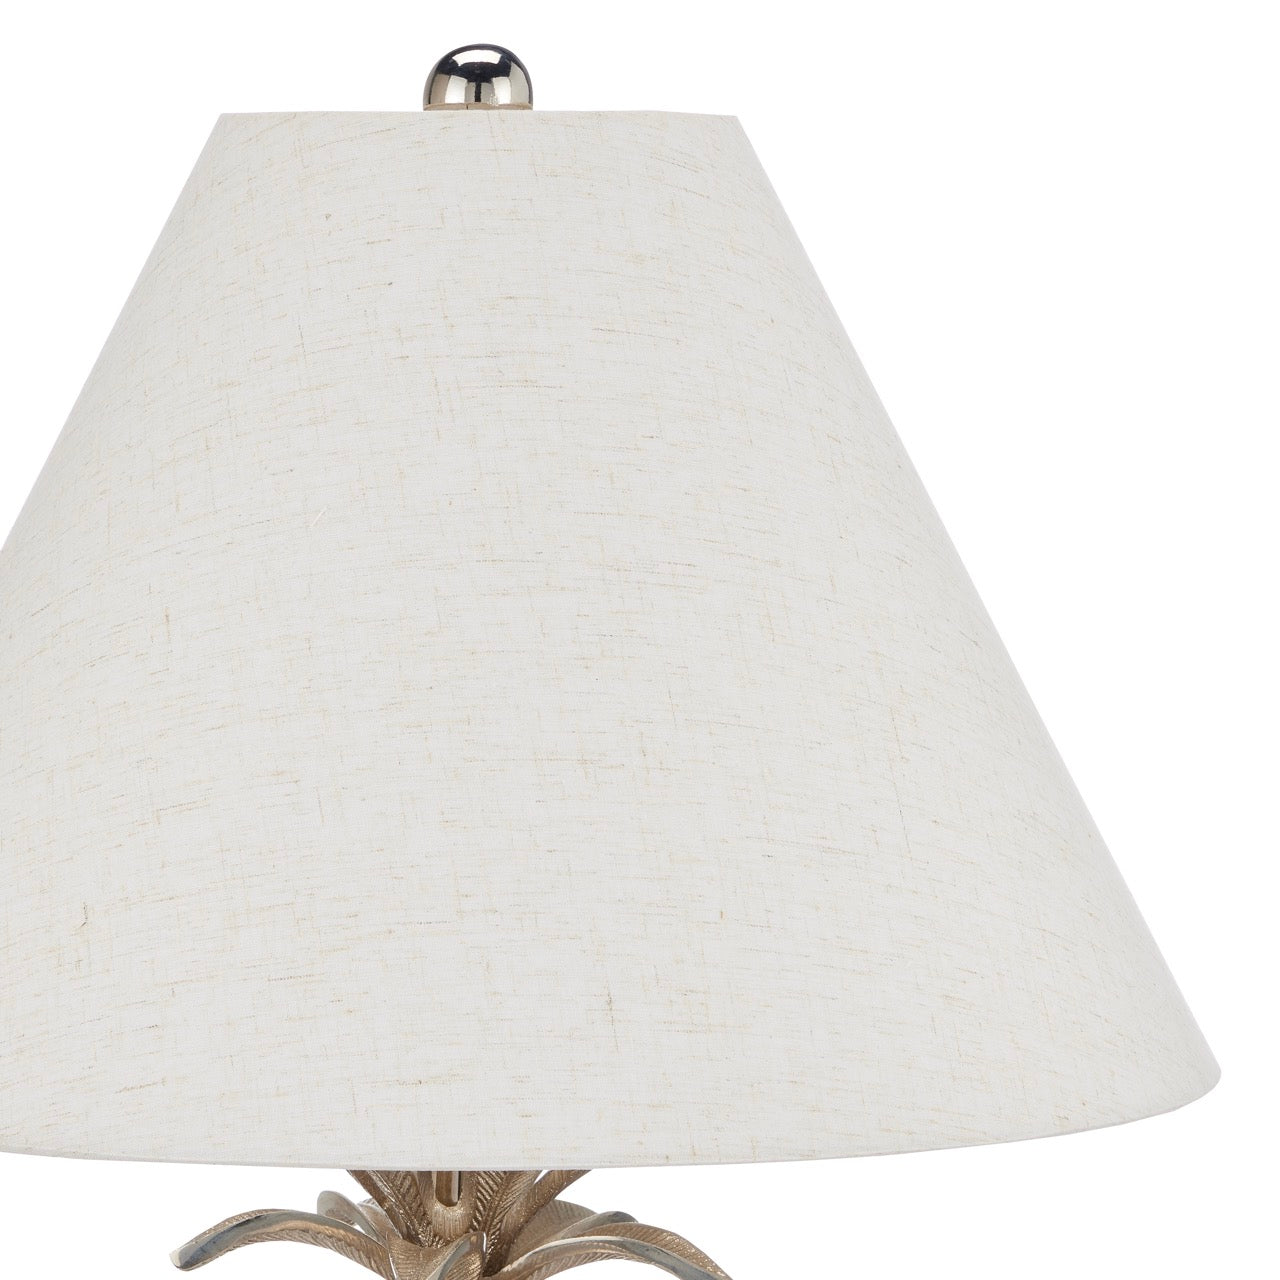 Palmyra Table Lamp by Currey & Company | Luxury Table Lamp | Willow & Albert Home